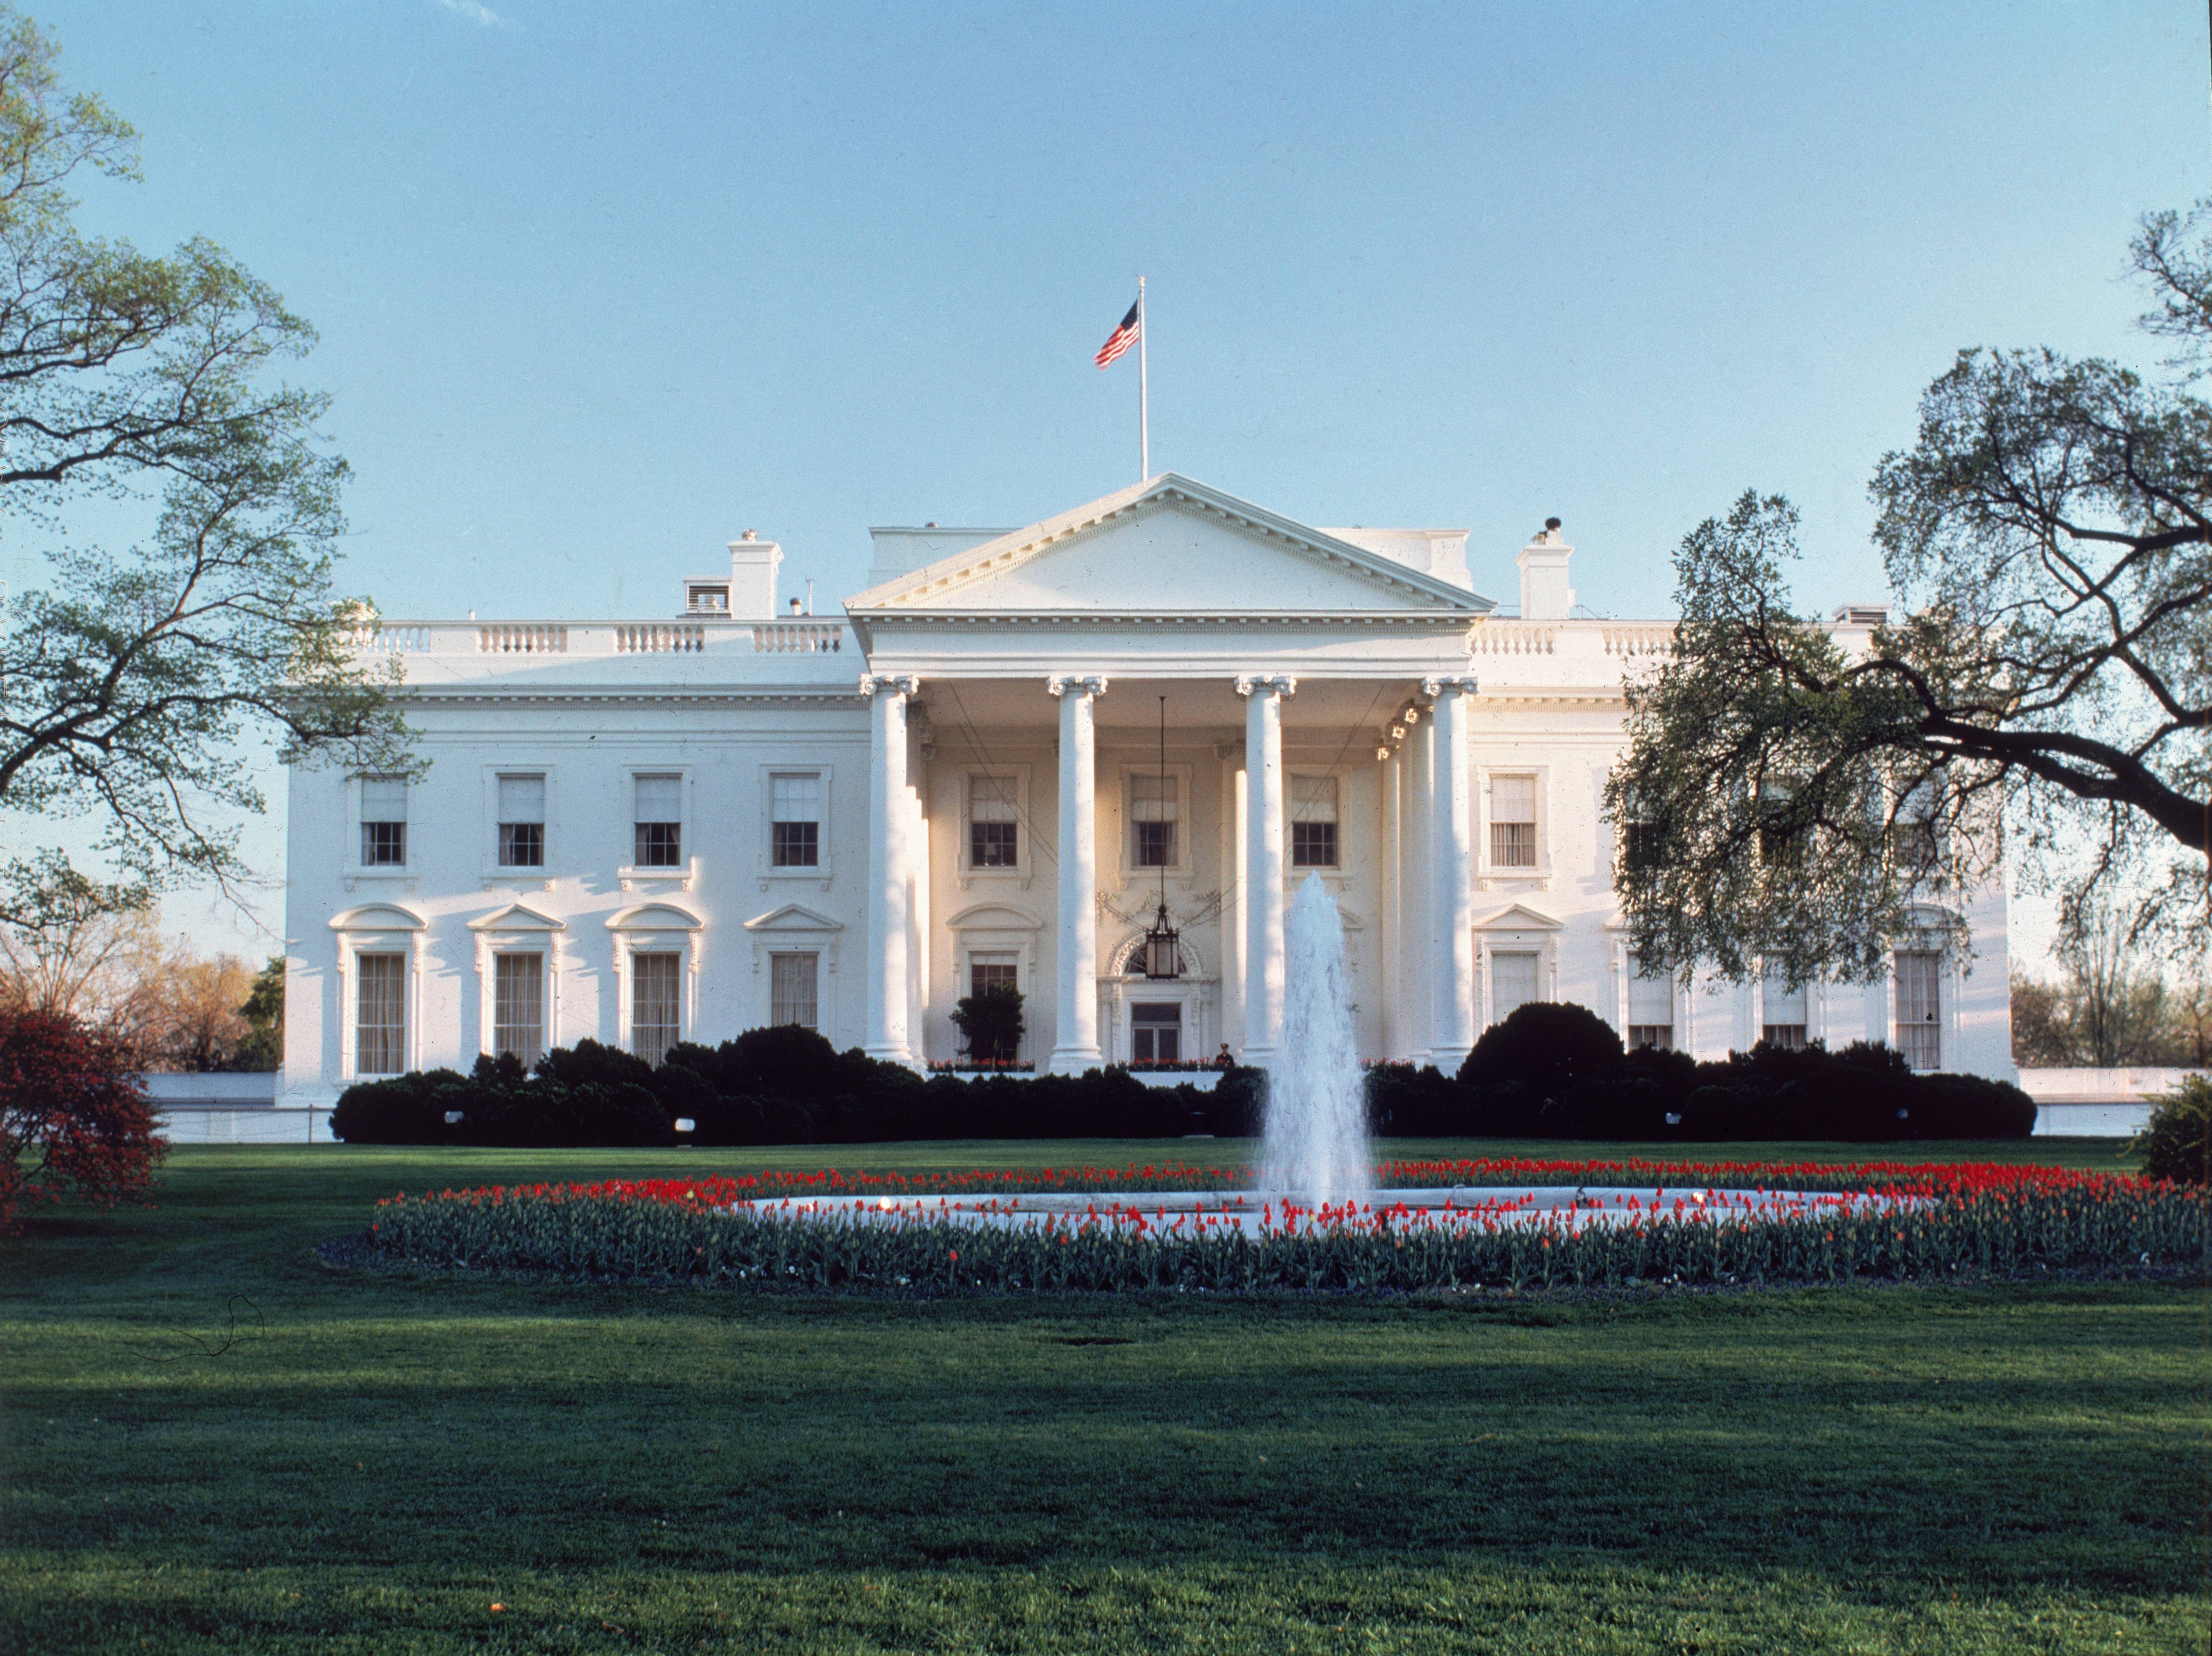 The residence of the President of the United States, known as the White House, Washington, DC, late 20th Century. (Photo by Lambert/Getty Images)